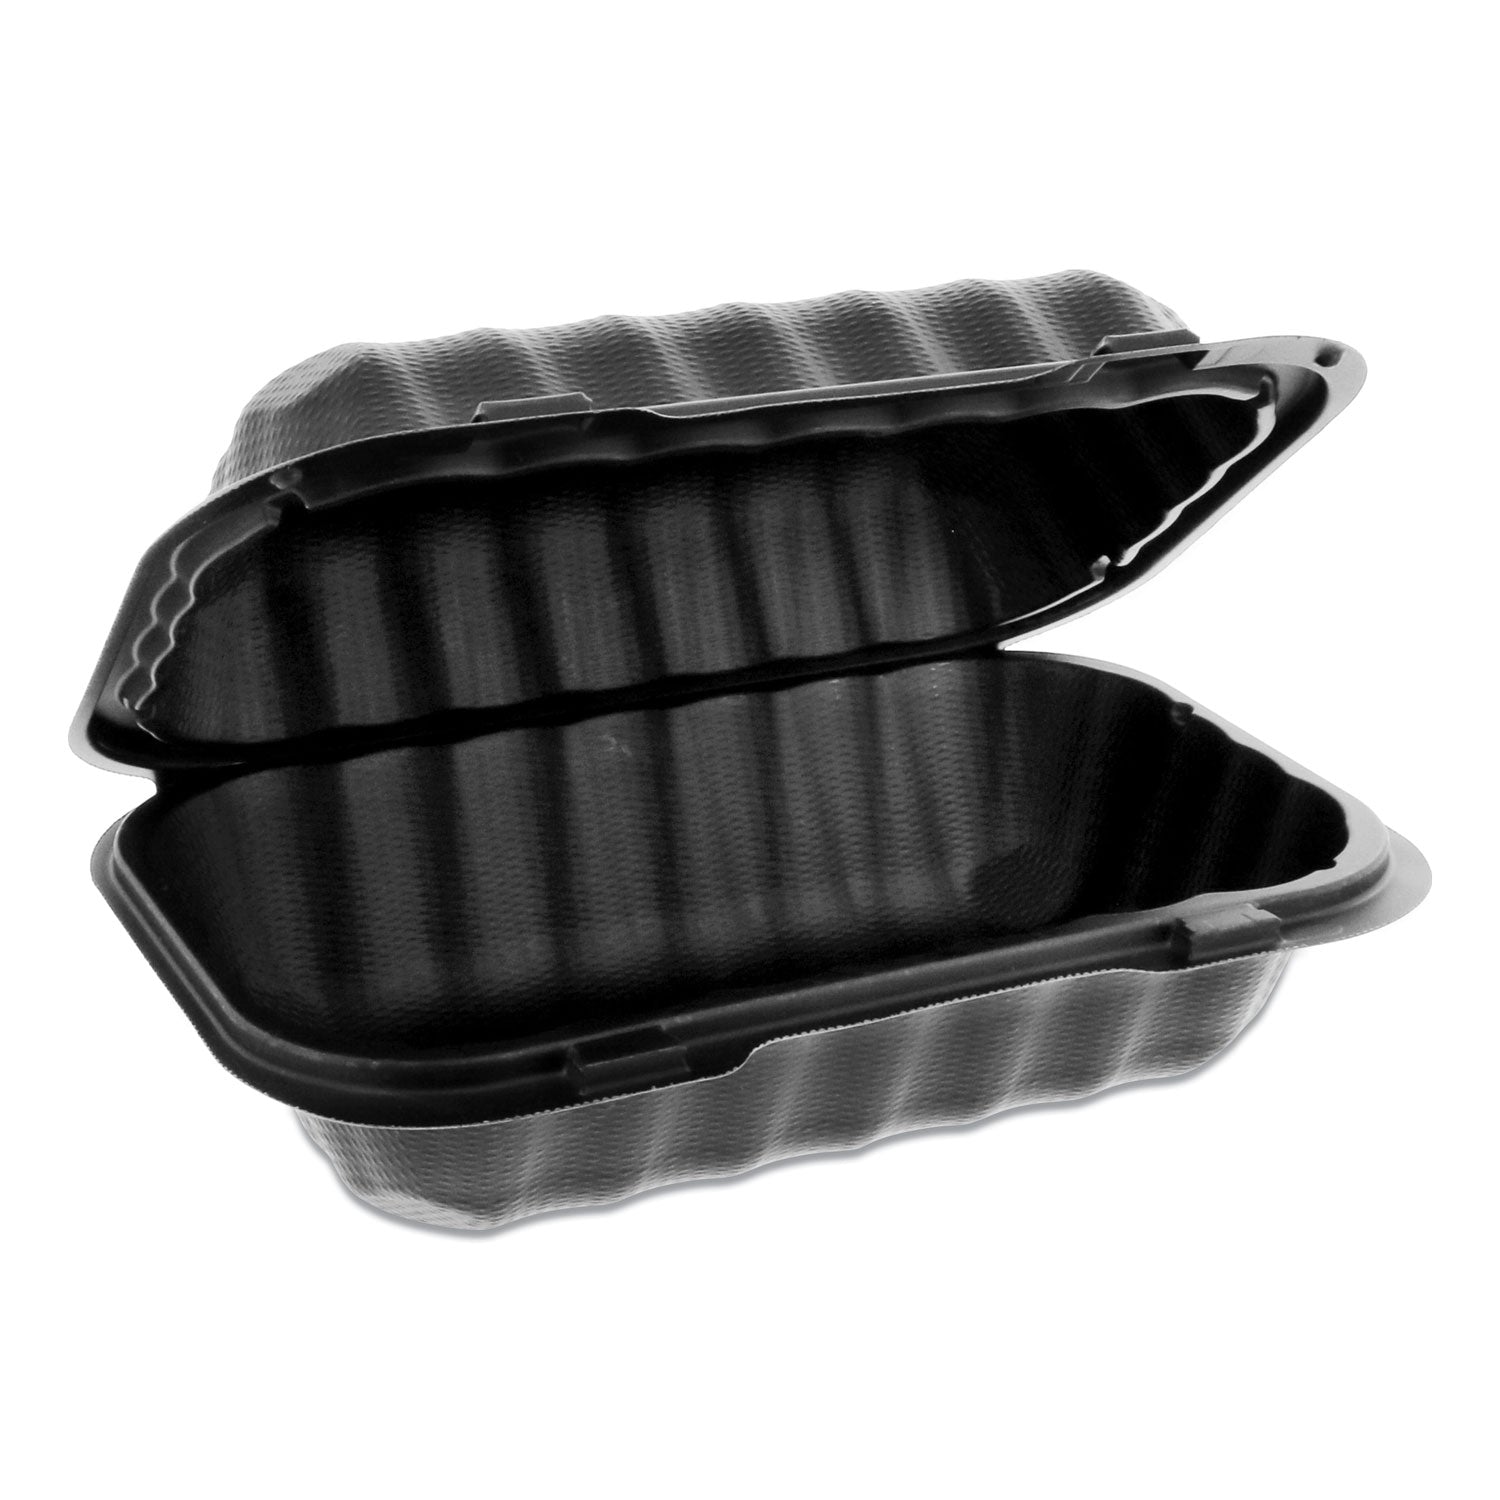 earthchoice-smartlock-microwavable-mfpp-hinged-lid-container-9-x-6-x-325-black-plastic-270-carton_pctycnb80961000 - 1